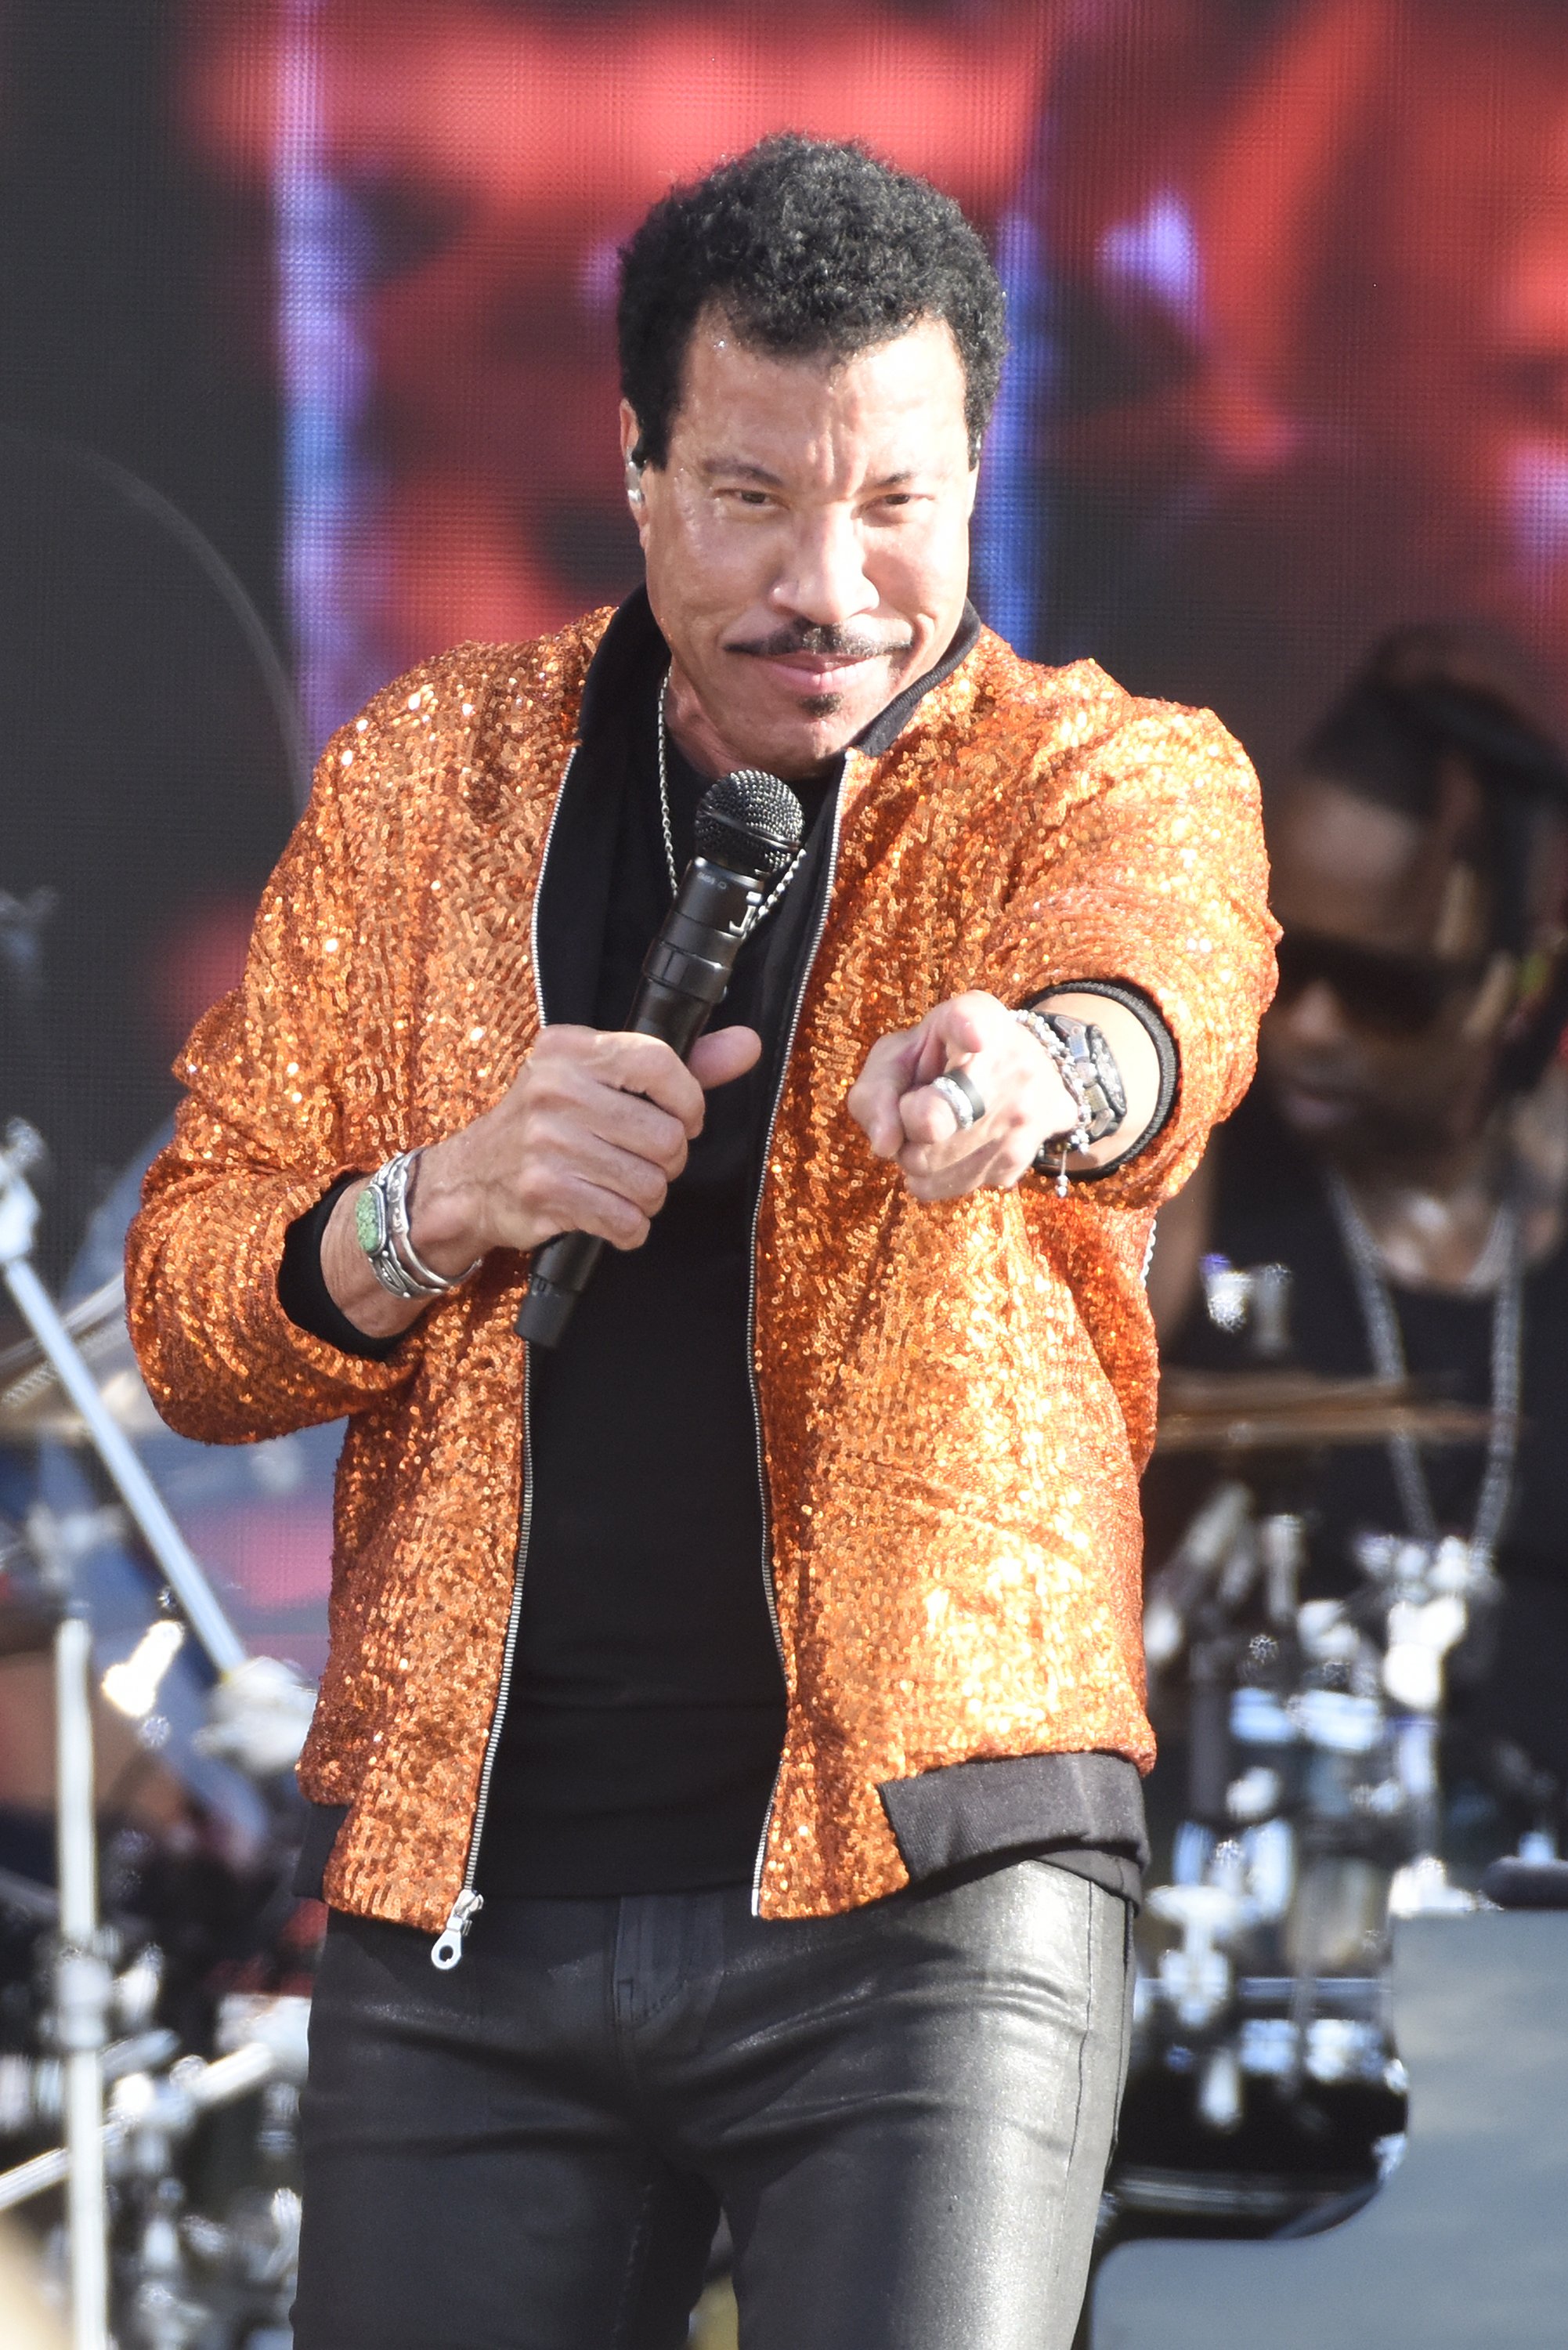  Lionel Richie performs during the 2022 New Orleans Jazz & Heritage festival at Fair Grounds Race Course on April 29, 2022 in New Orleans, Louisiana. | Source: Getty Images